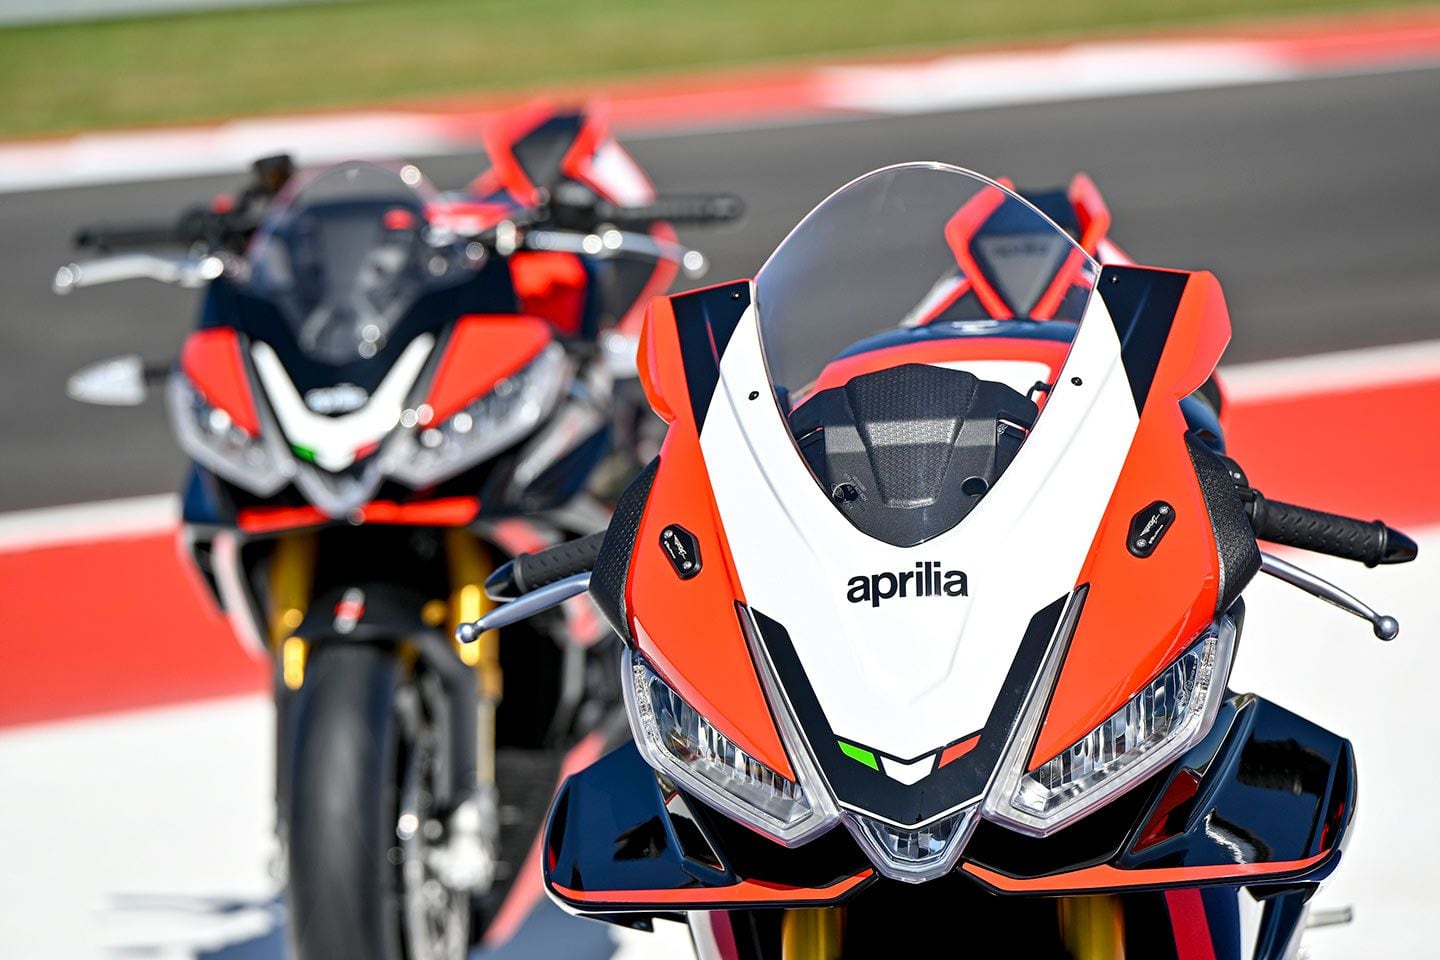 The RSV4 (foreground) and Tuono (back) at the track. | Photo: Piaggio Group